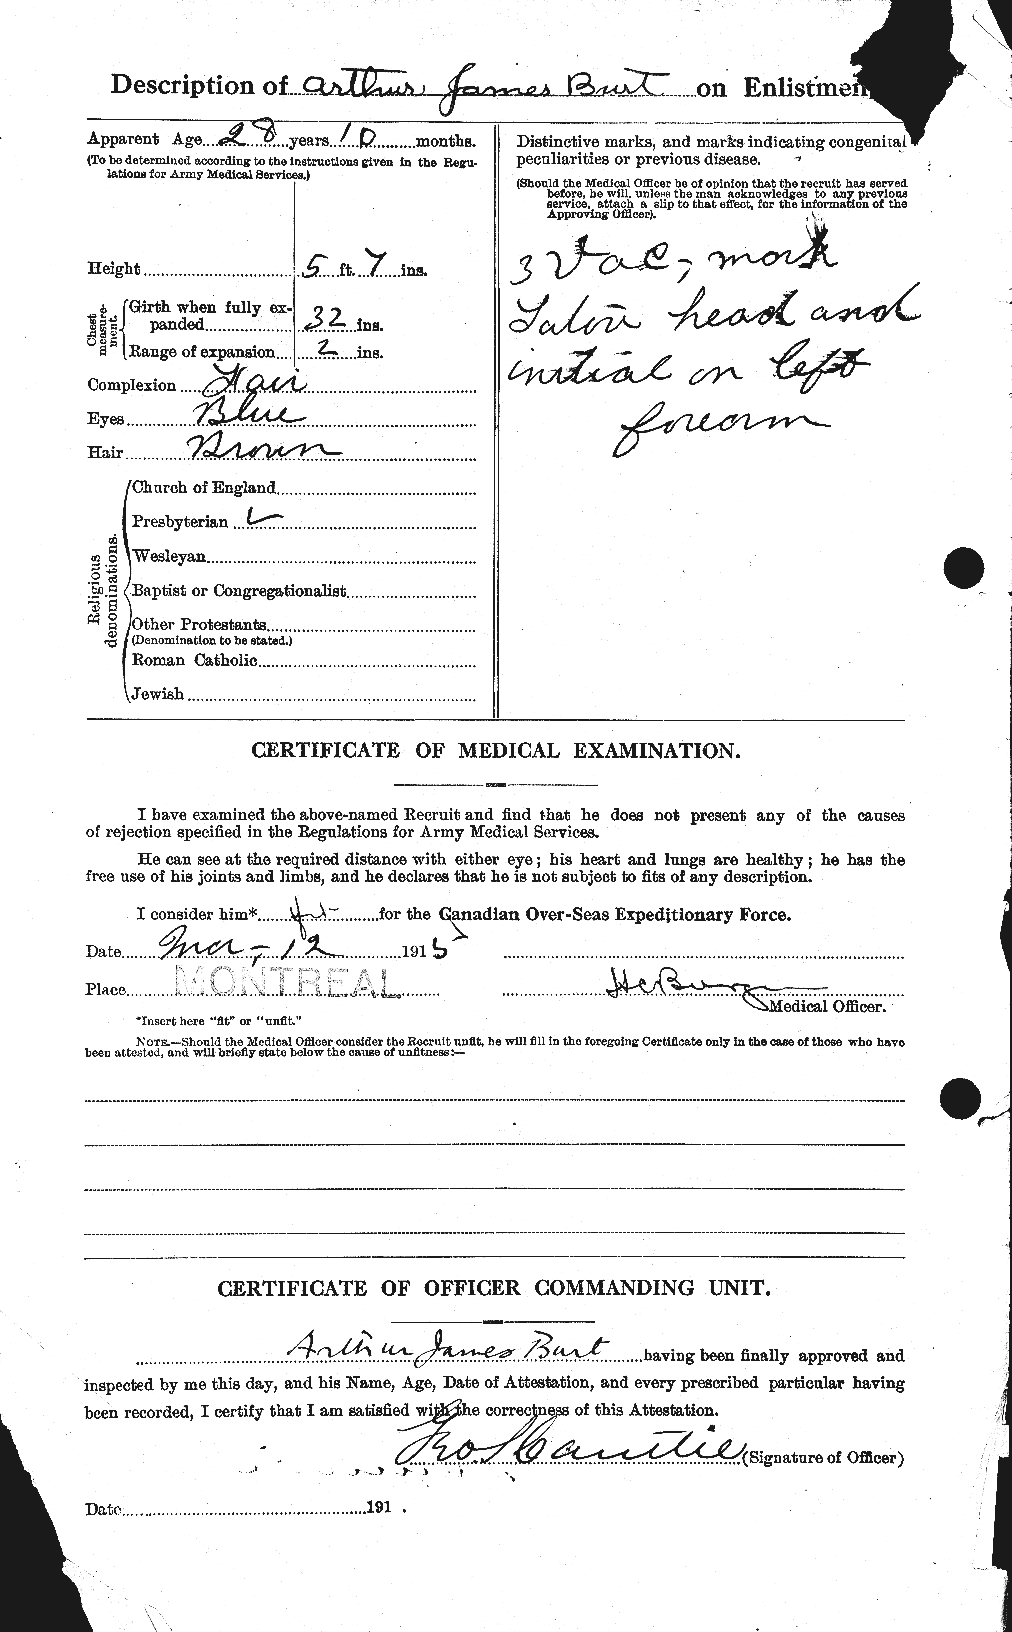 Personnel Records of the First World War - CEF 274975b